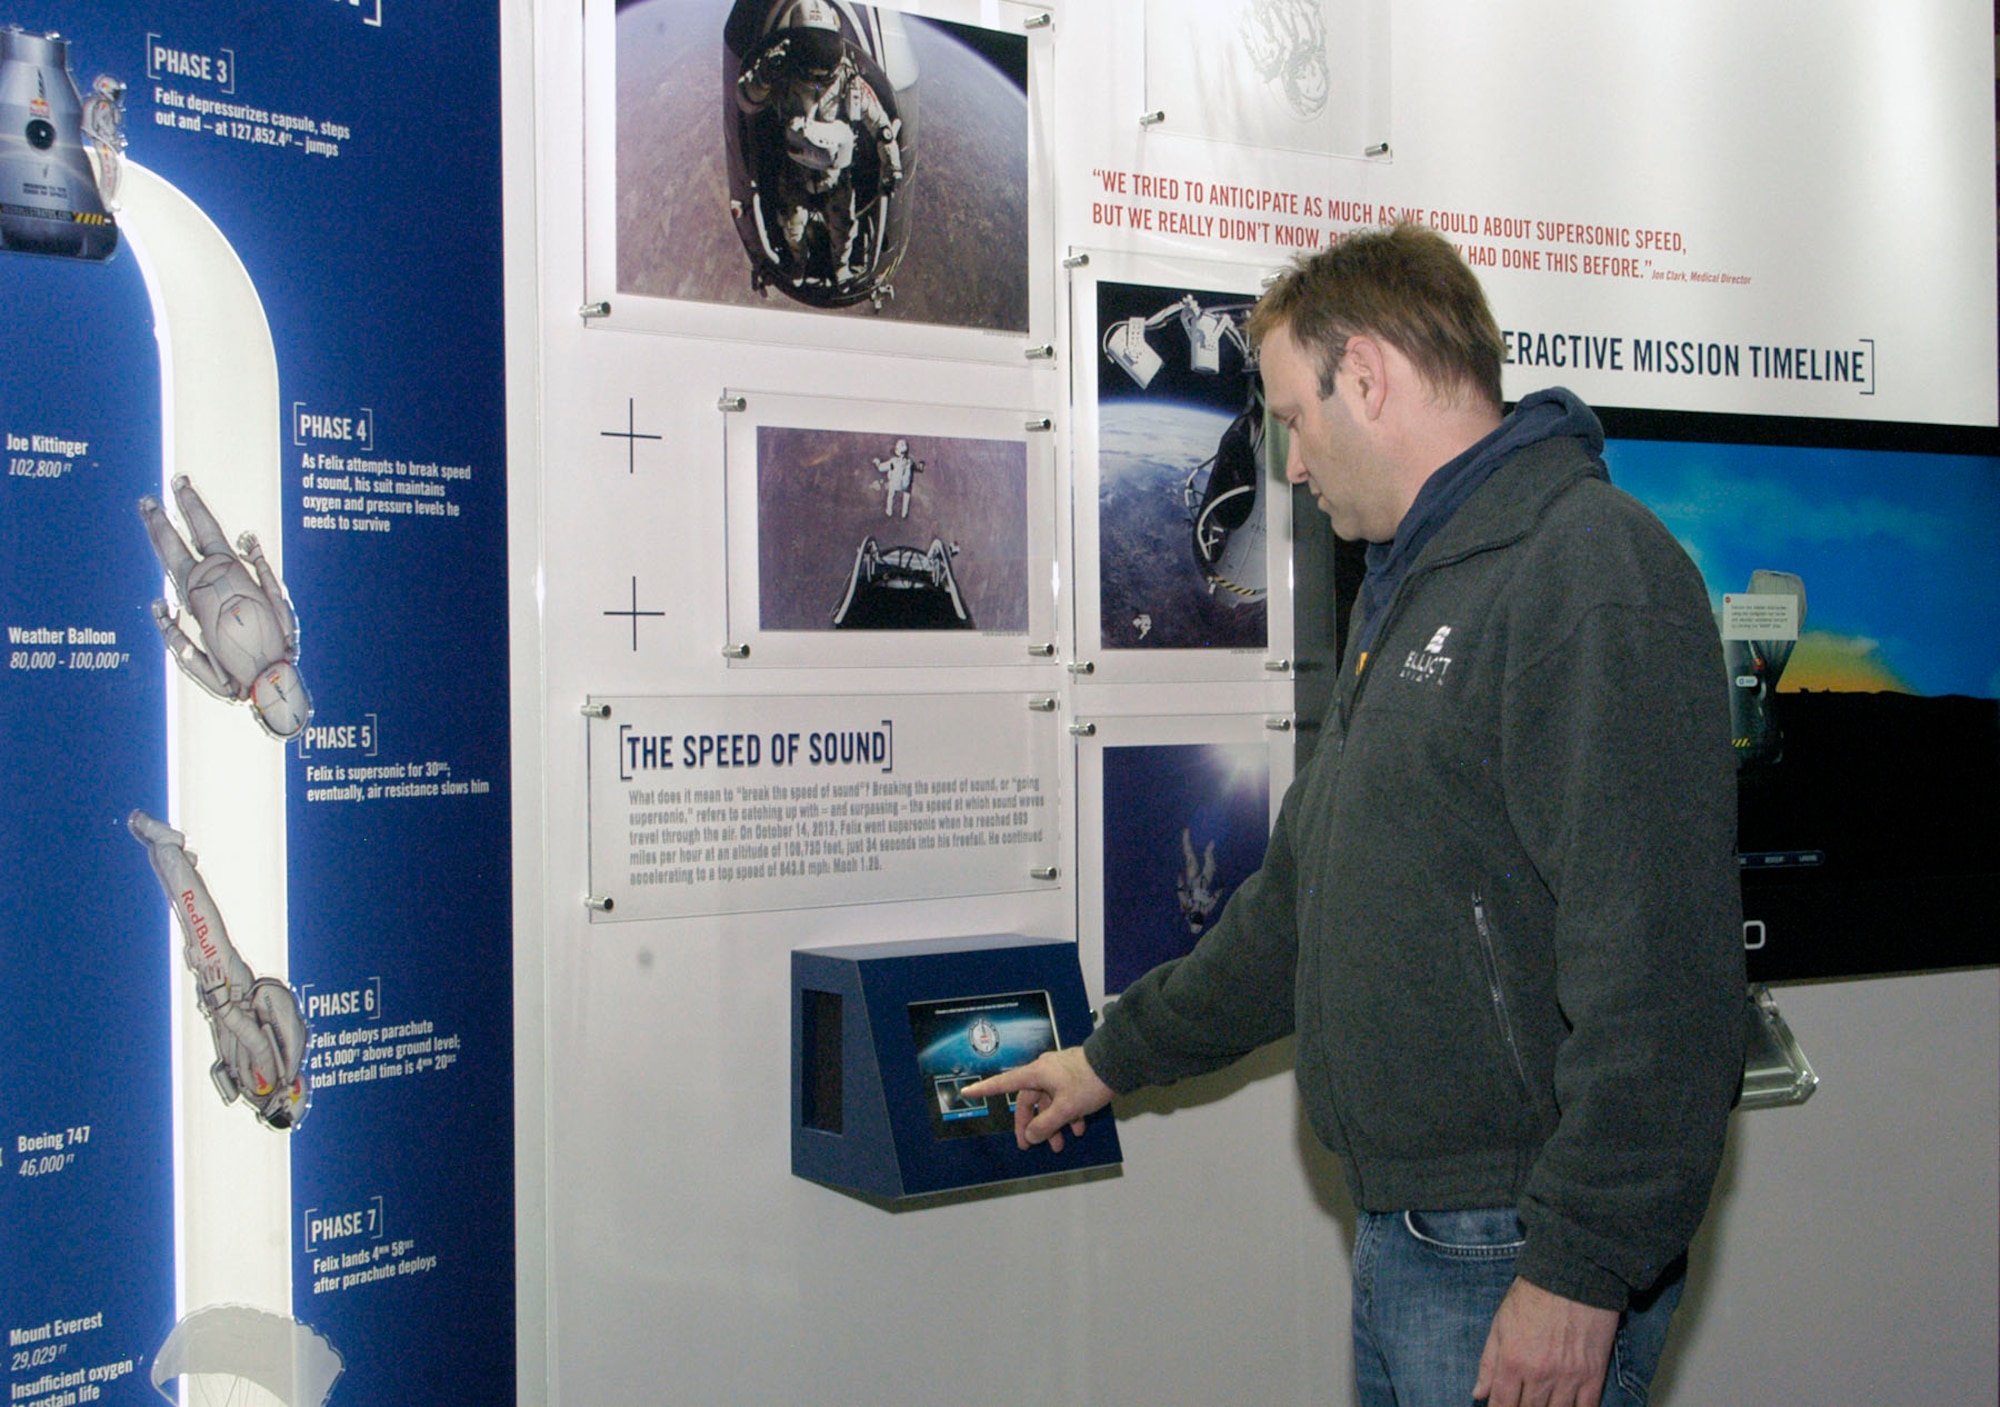 The Red Bull Stratos exhibit will be on display at the National Museum of the U.S. Air Force from Jan. 24-March 16, 2014. (U.S. Air Force photo)